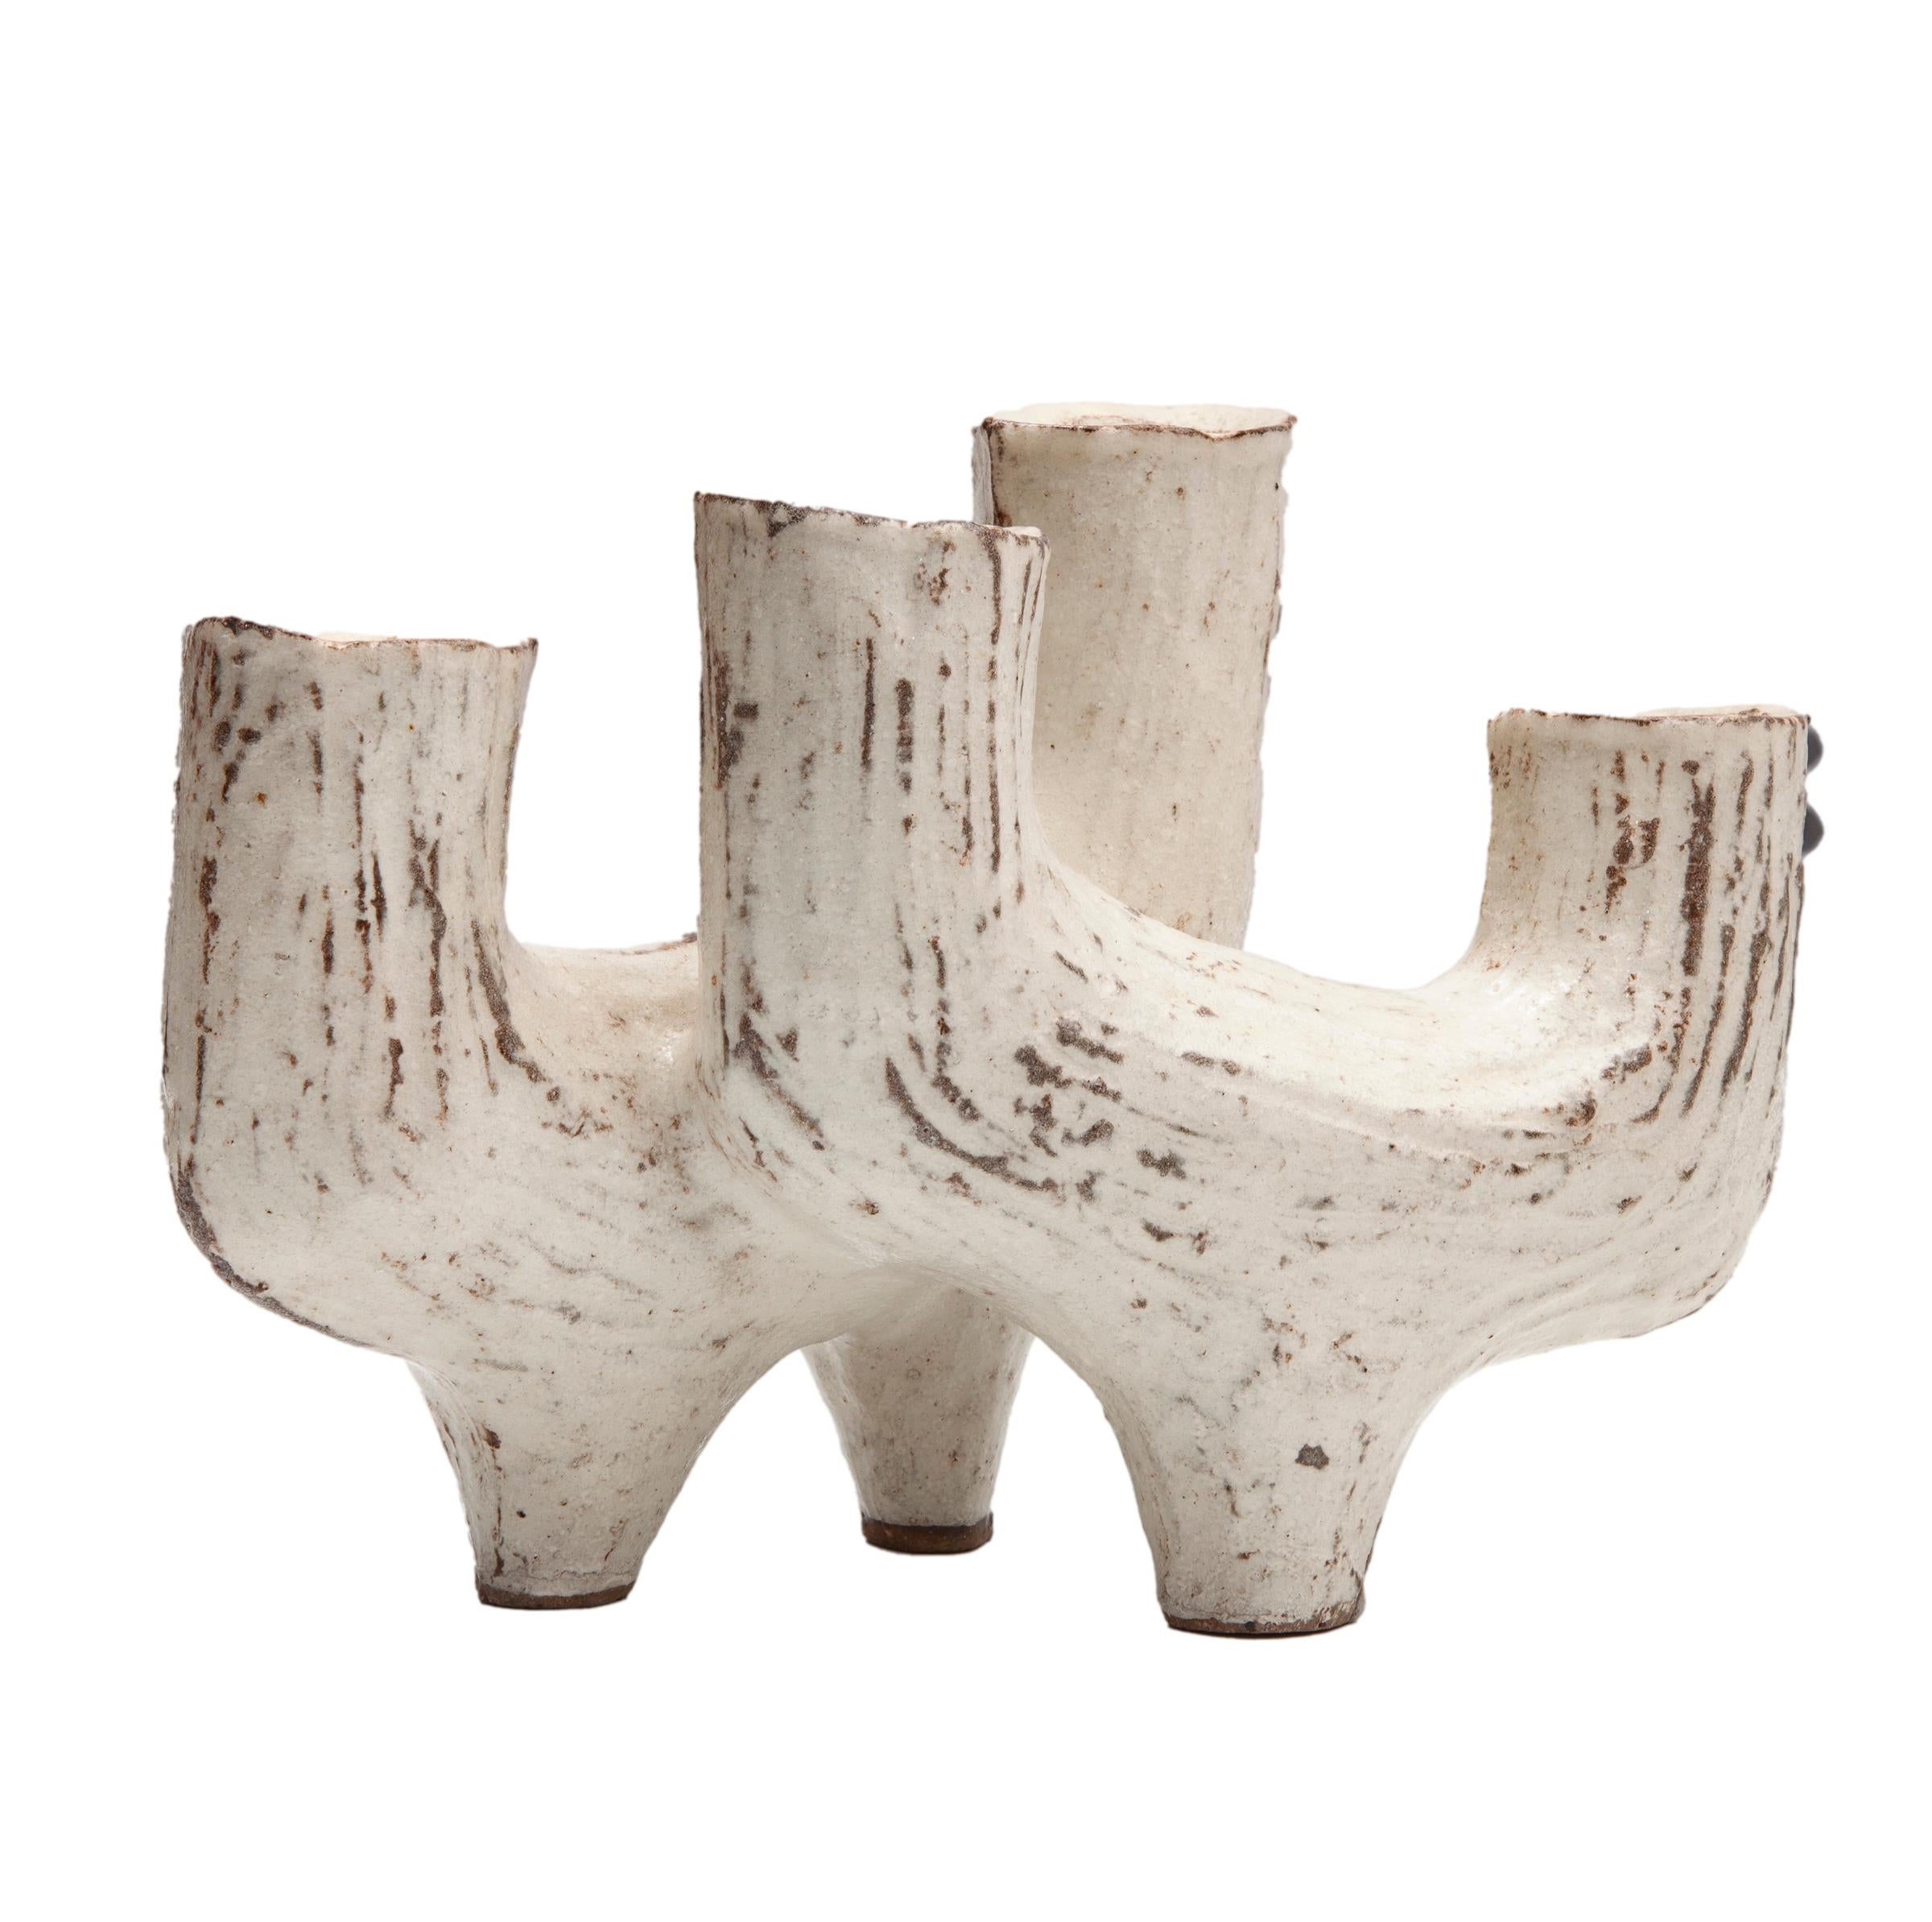 Mid century organic modern footed candleholder with 4 candleholders in oyster white with brown linear texture.